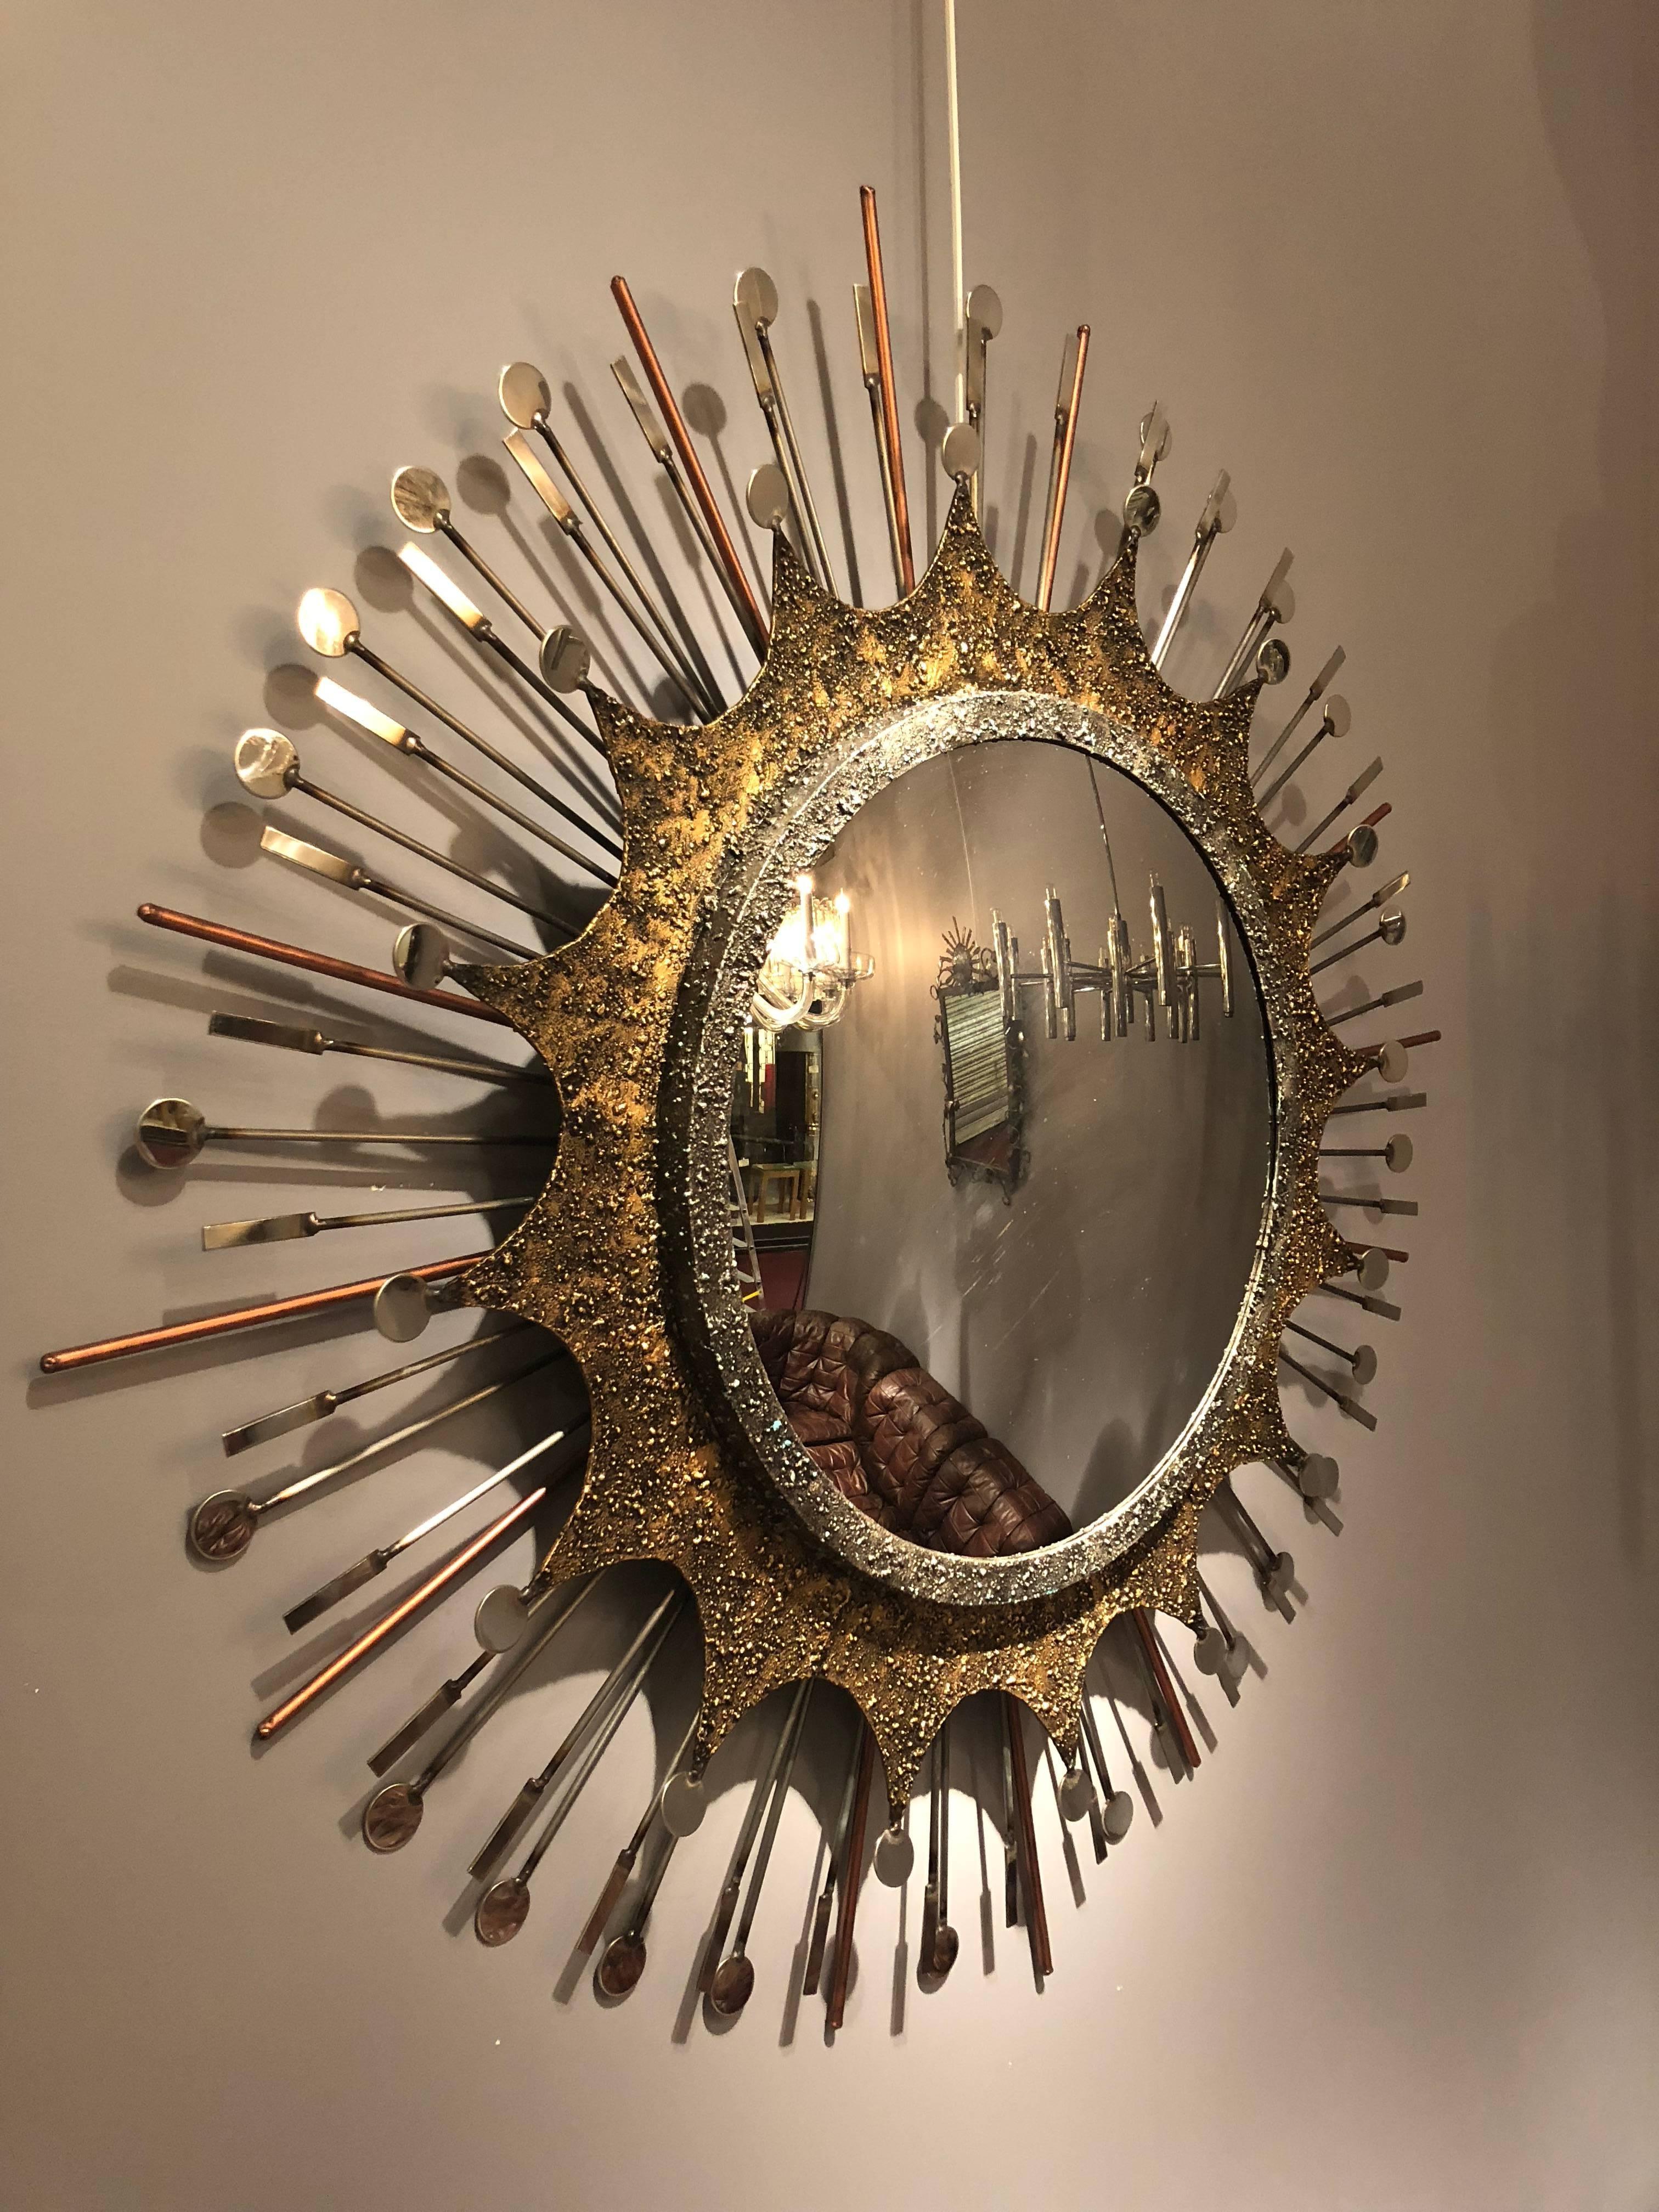 Brutalist patinated steel and stainless steel mirror by the French artist Liger in exclusivity for the Gallery. Unique design in gold and silver patina. Comes with a certificate. 1/1